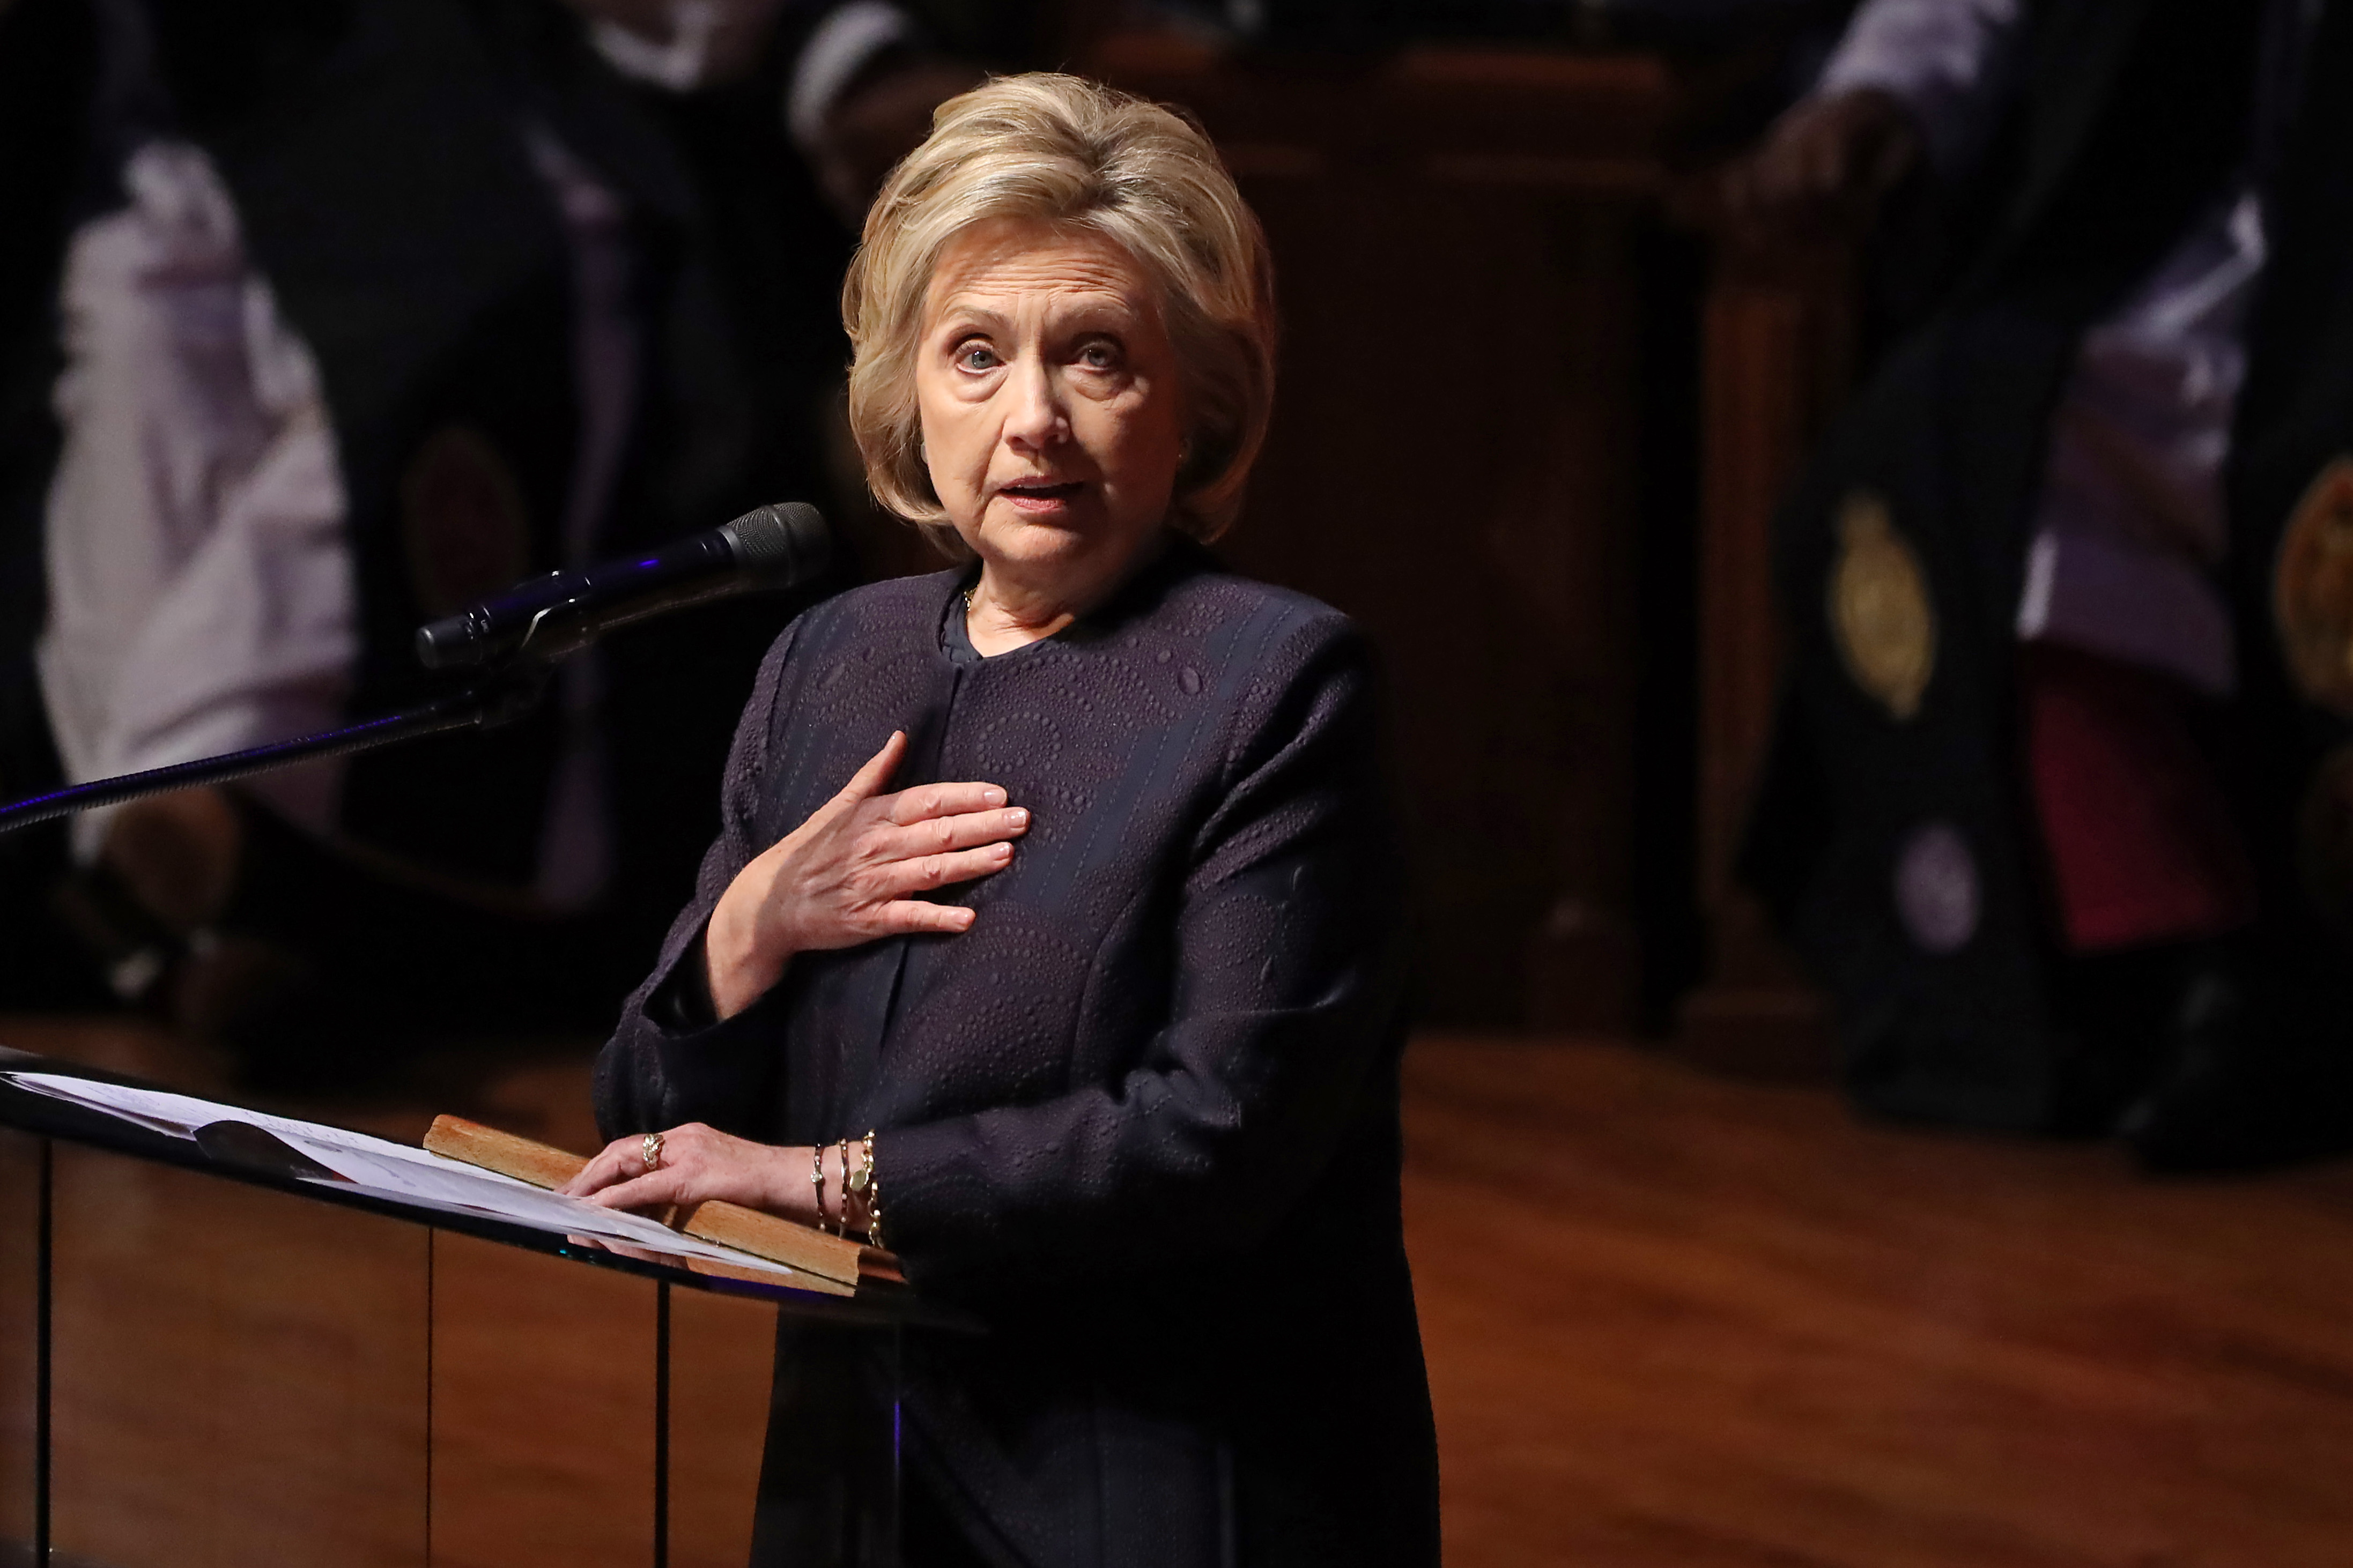 Former first lady and Secretary of State Hillary Clinton delivers remarks during the funeral service for Rep. Elijah Cummings (D-MD) at New Psalmist Baptist Church on October 25, 2019 in Baltimore, Maryland. (Chip Somodevilla/Getty Images)